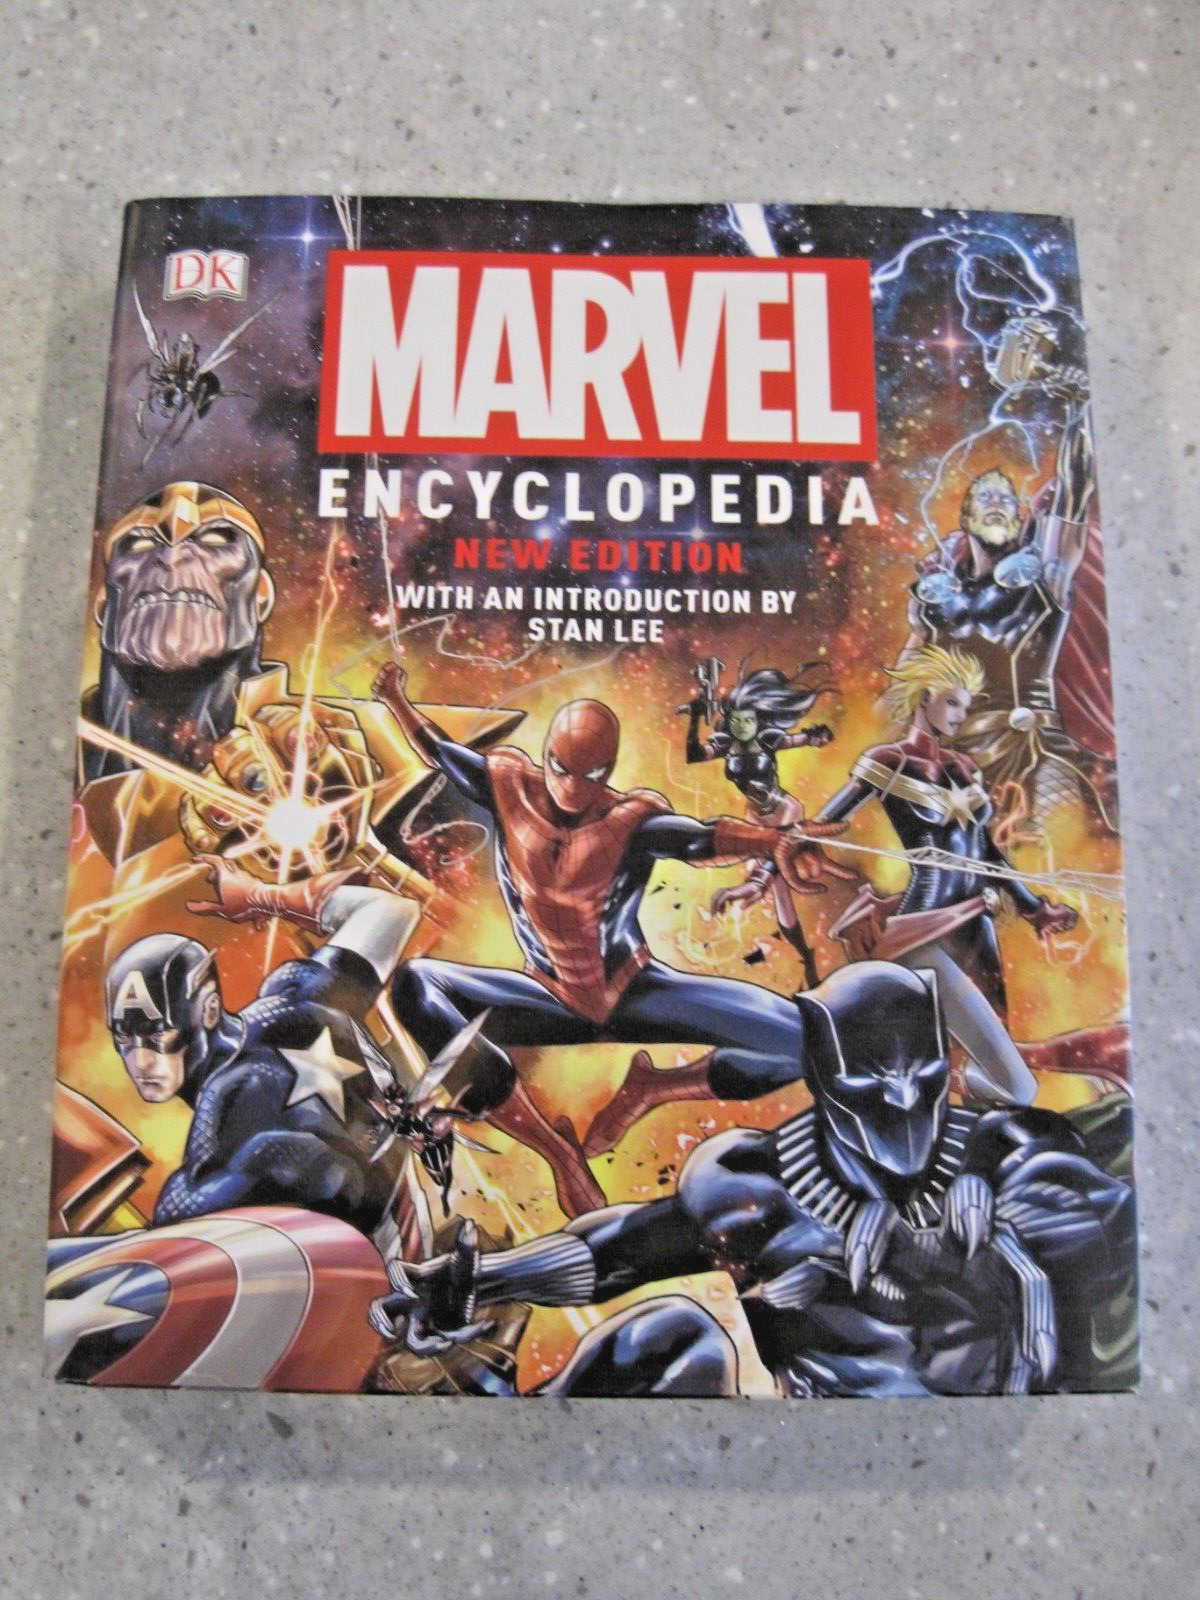 Marvel Encyclopedia New Edition Introduction by Stan Lee HC (4K)